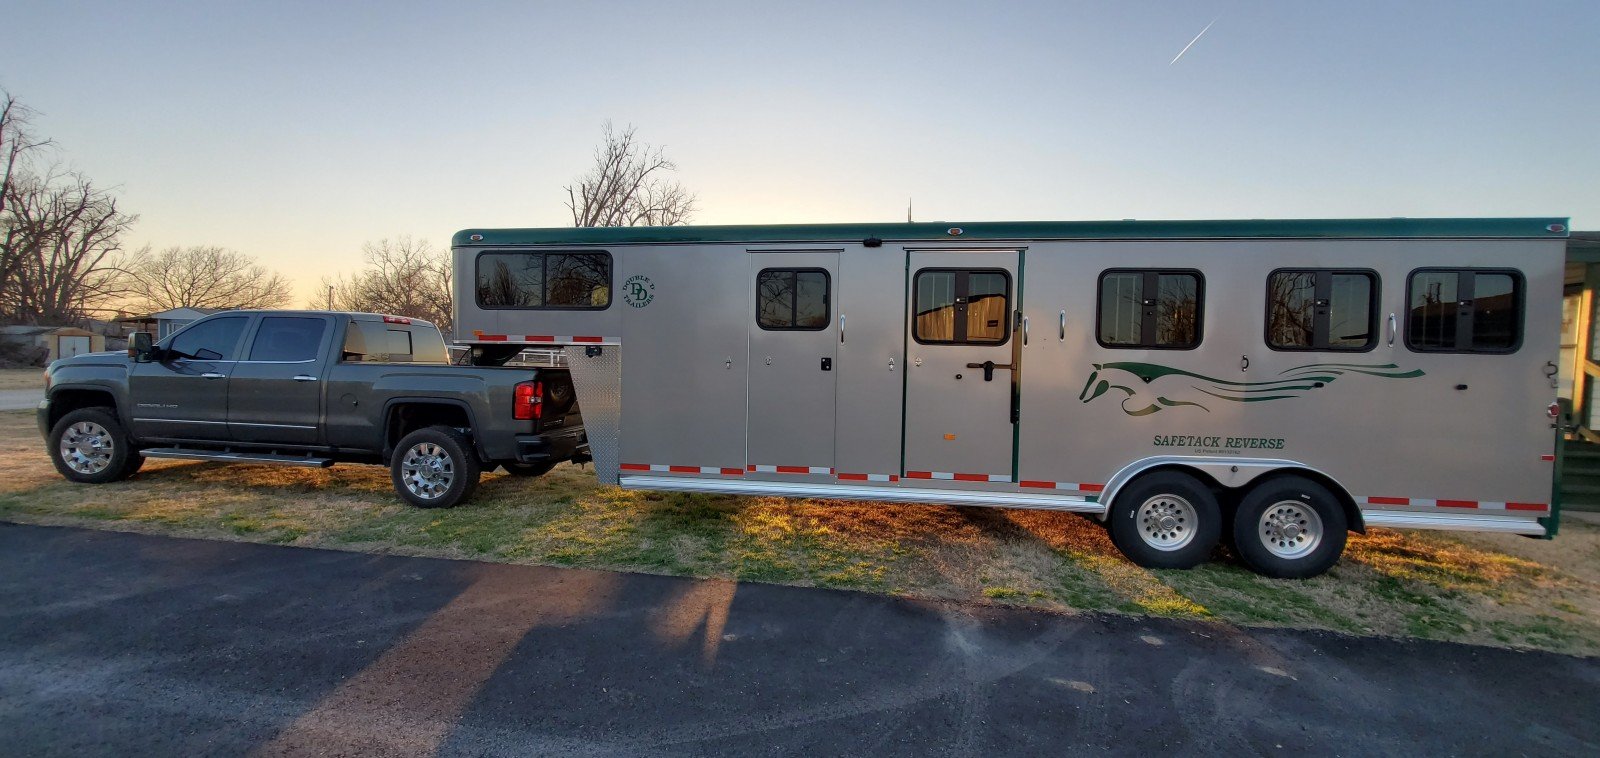 A Double D gooseneck horse trailer hitched to a tow vehicle.